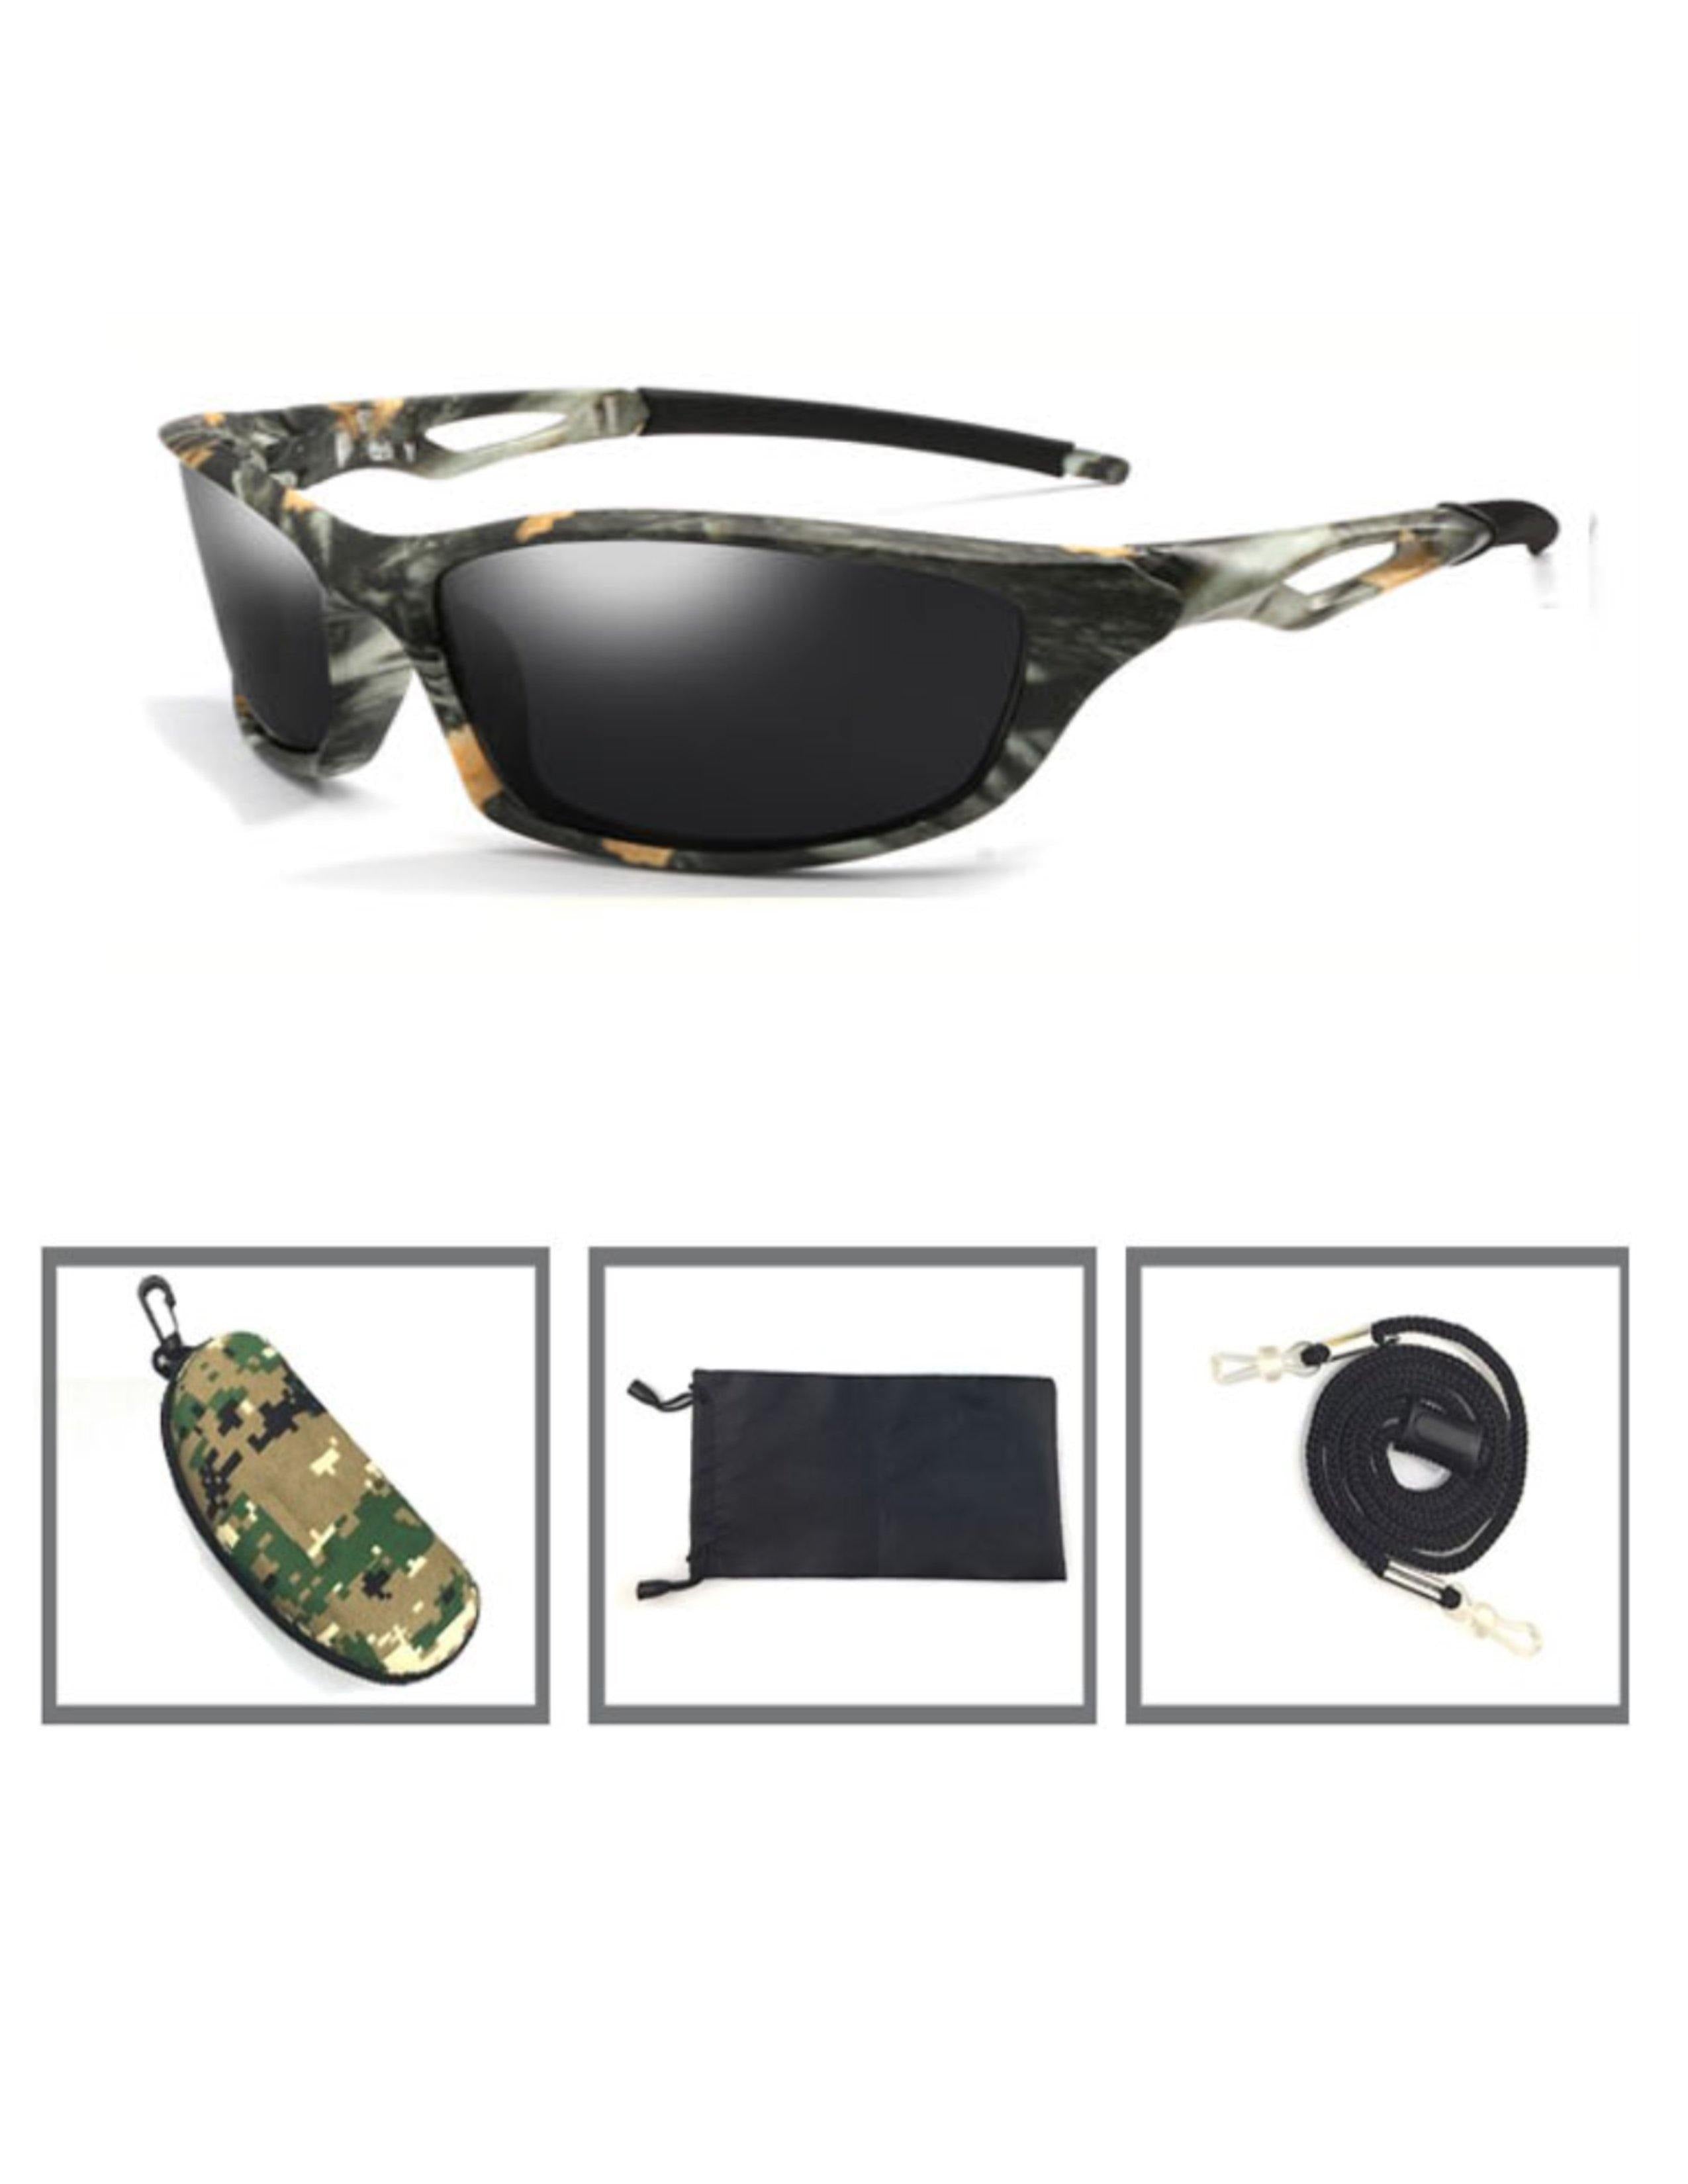 Tactical Men's/Women's Camouflage Polarized Sunglasses And Case UV400 (BLACK LENS) - Leapfrog Outdoor Sports and Apparel